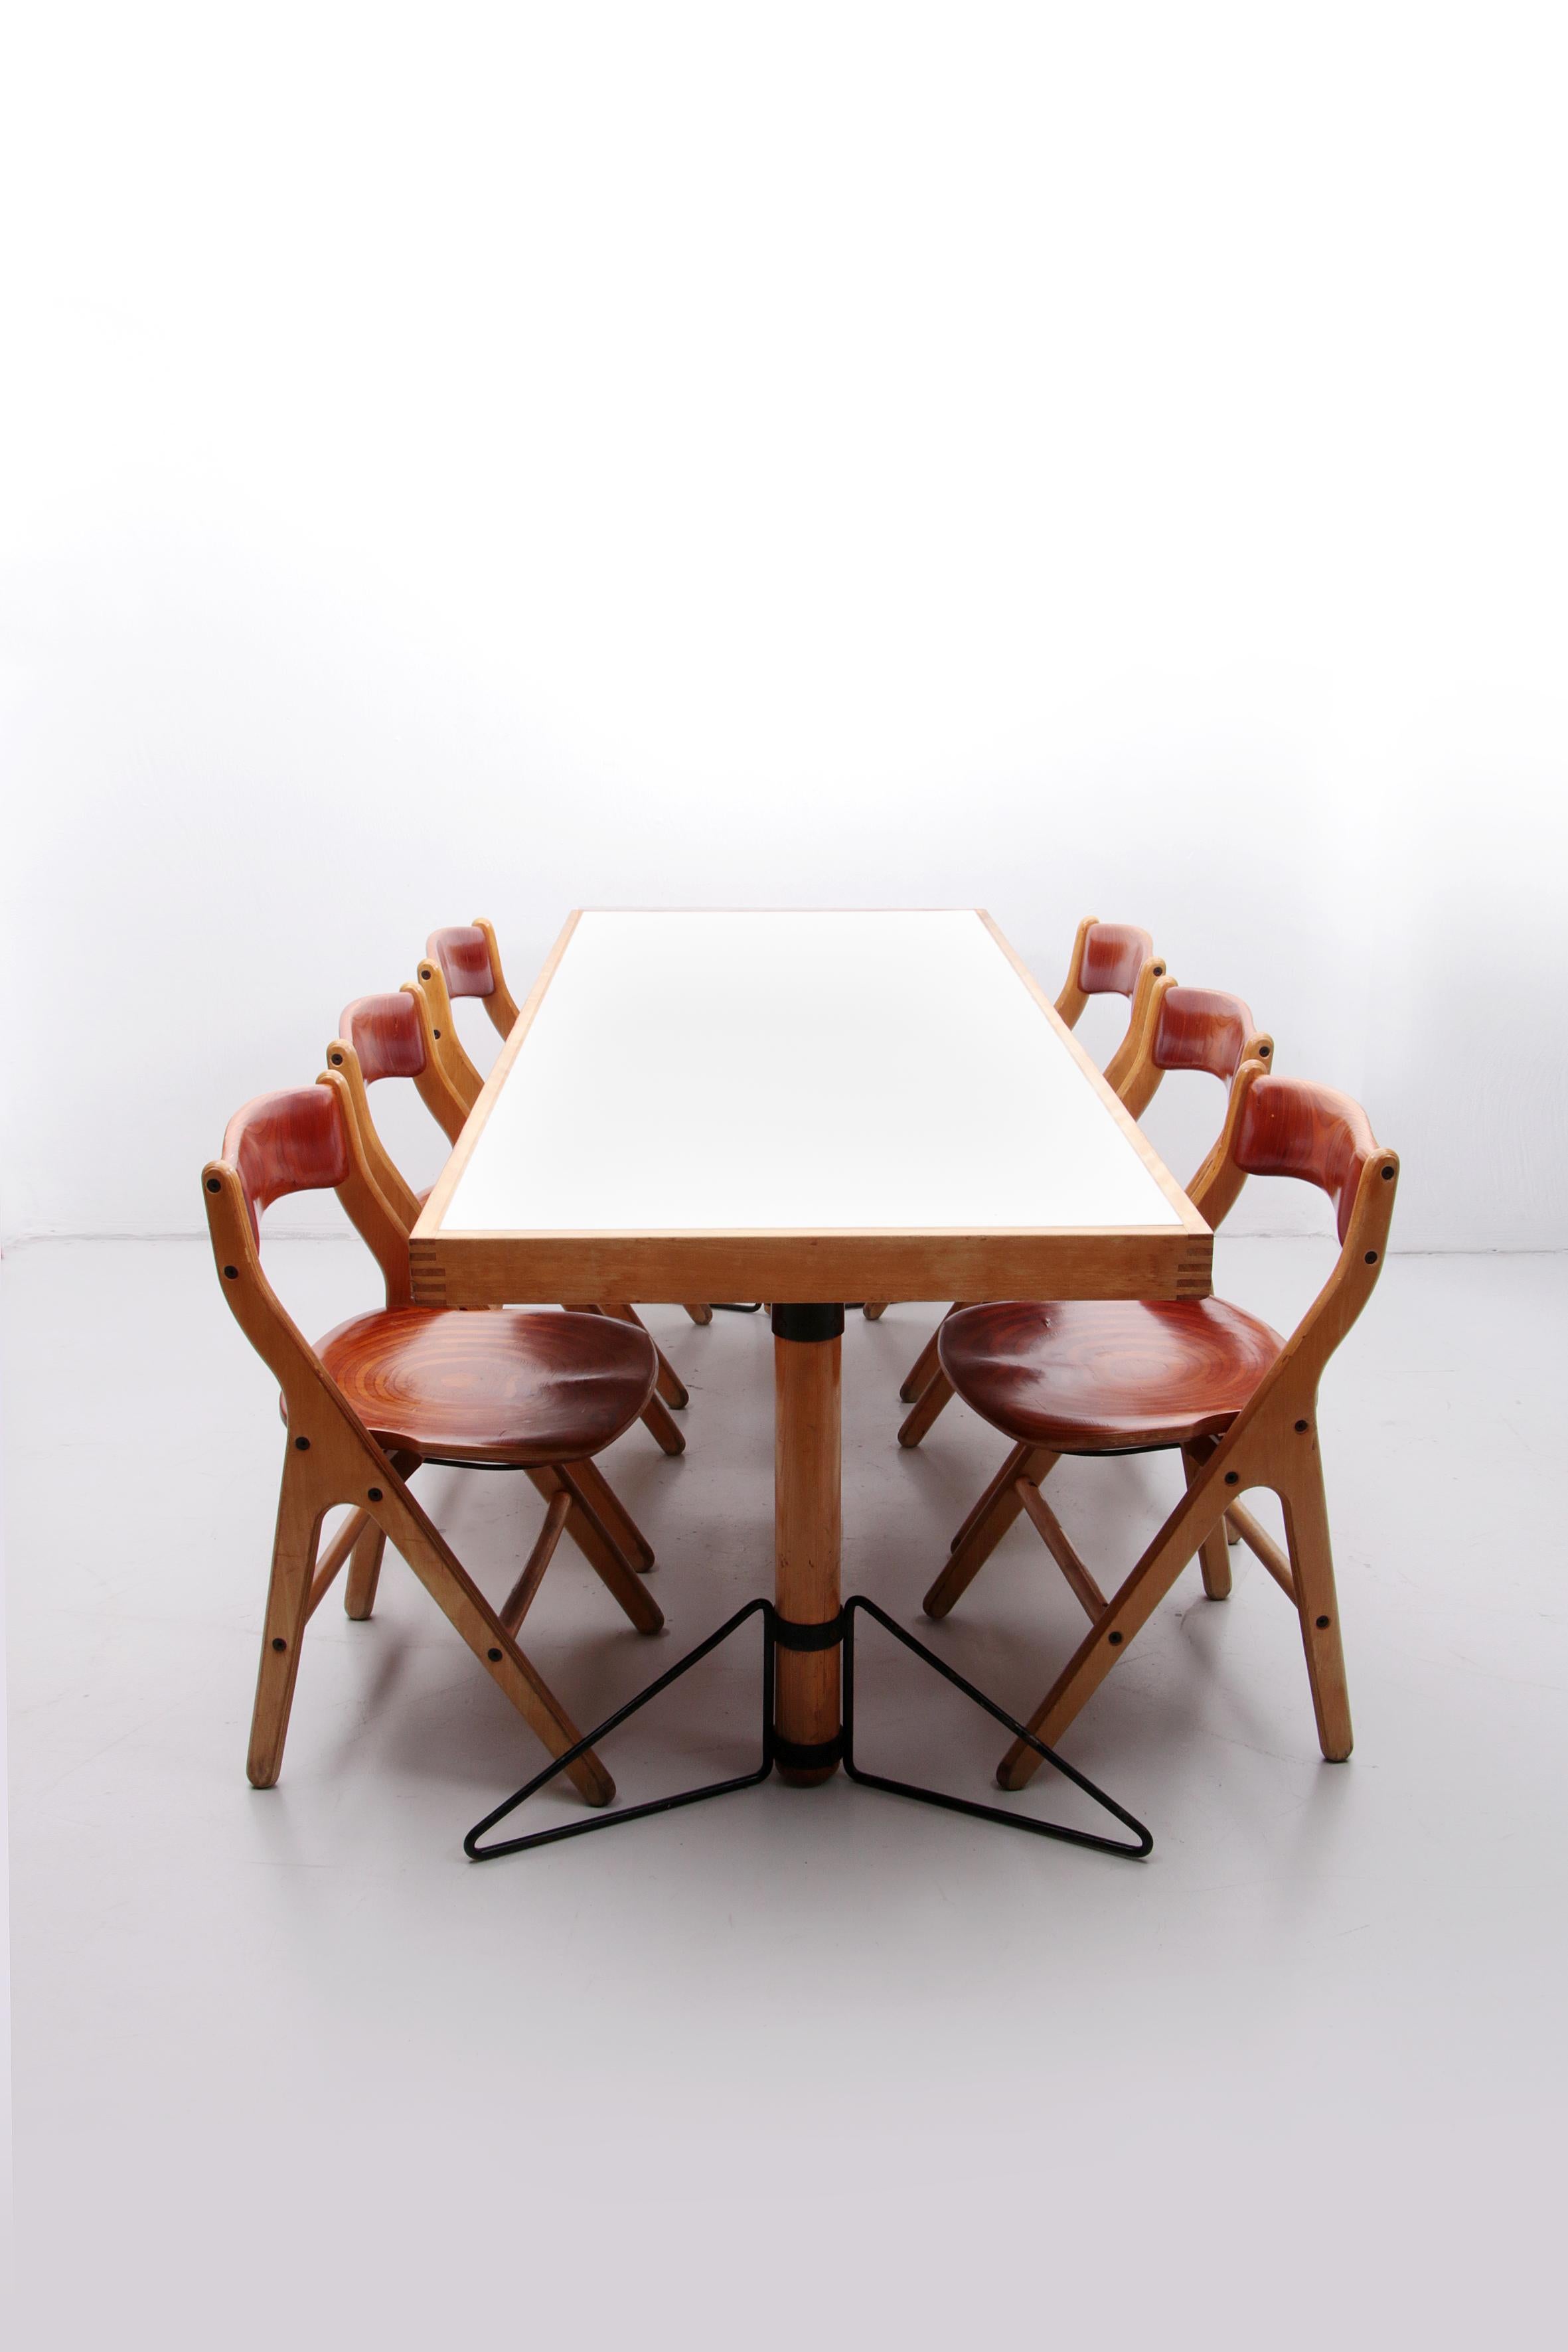 Beautiful set of a dining table with 6 chairs, you can hang these chairs on the table. See the photo. This is very easy to clean. Marc Held is a designer and lived in Montepelier.

Marc Held is an architect, photographer and designer. He has also